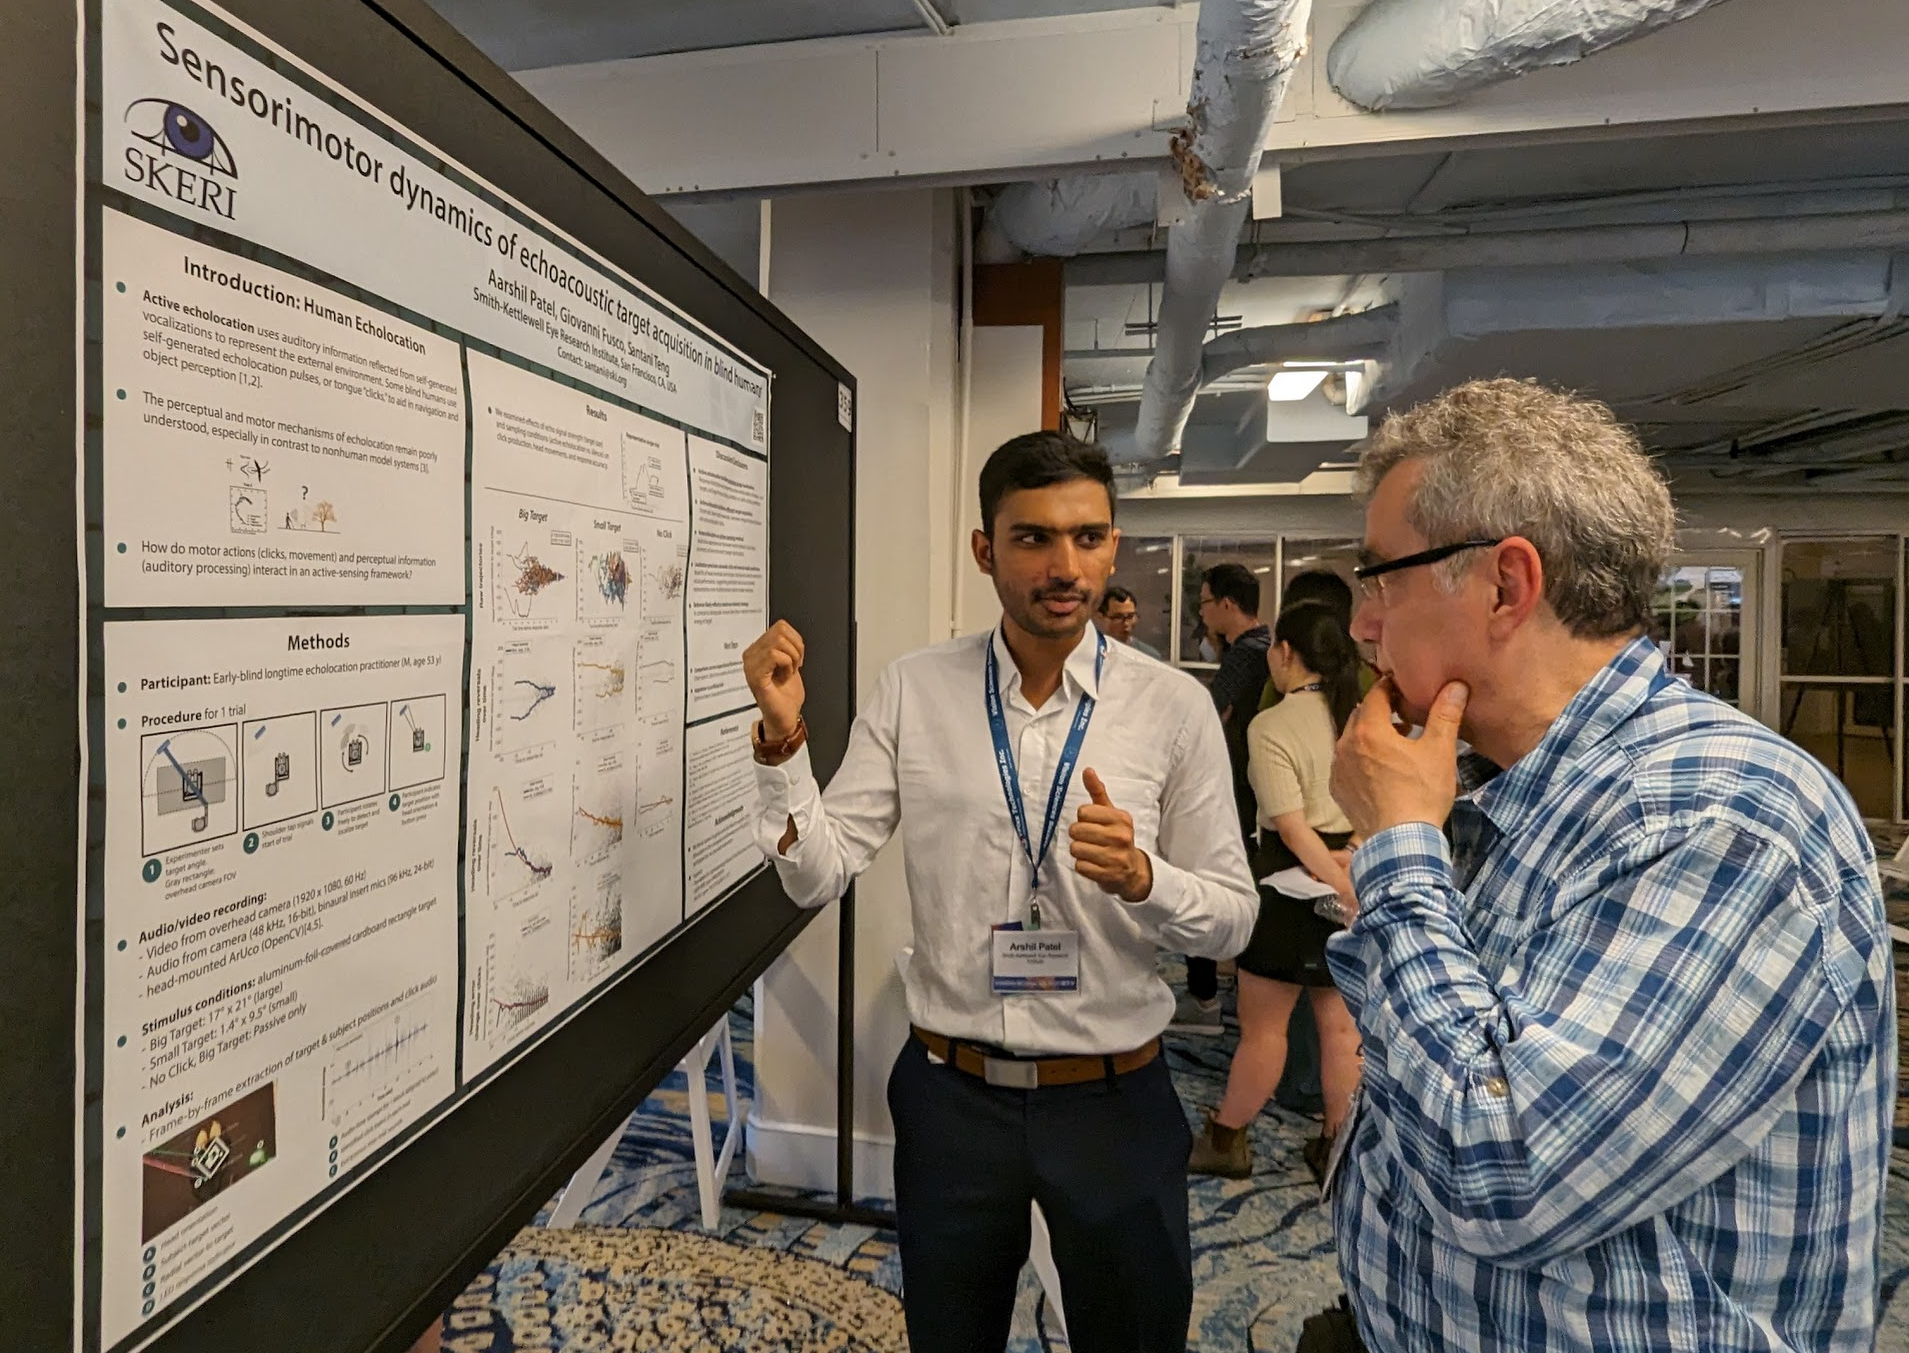 Arshil Patel presenting his poster to a VSS attendee